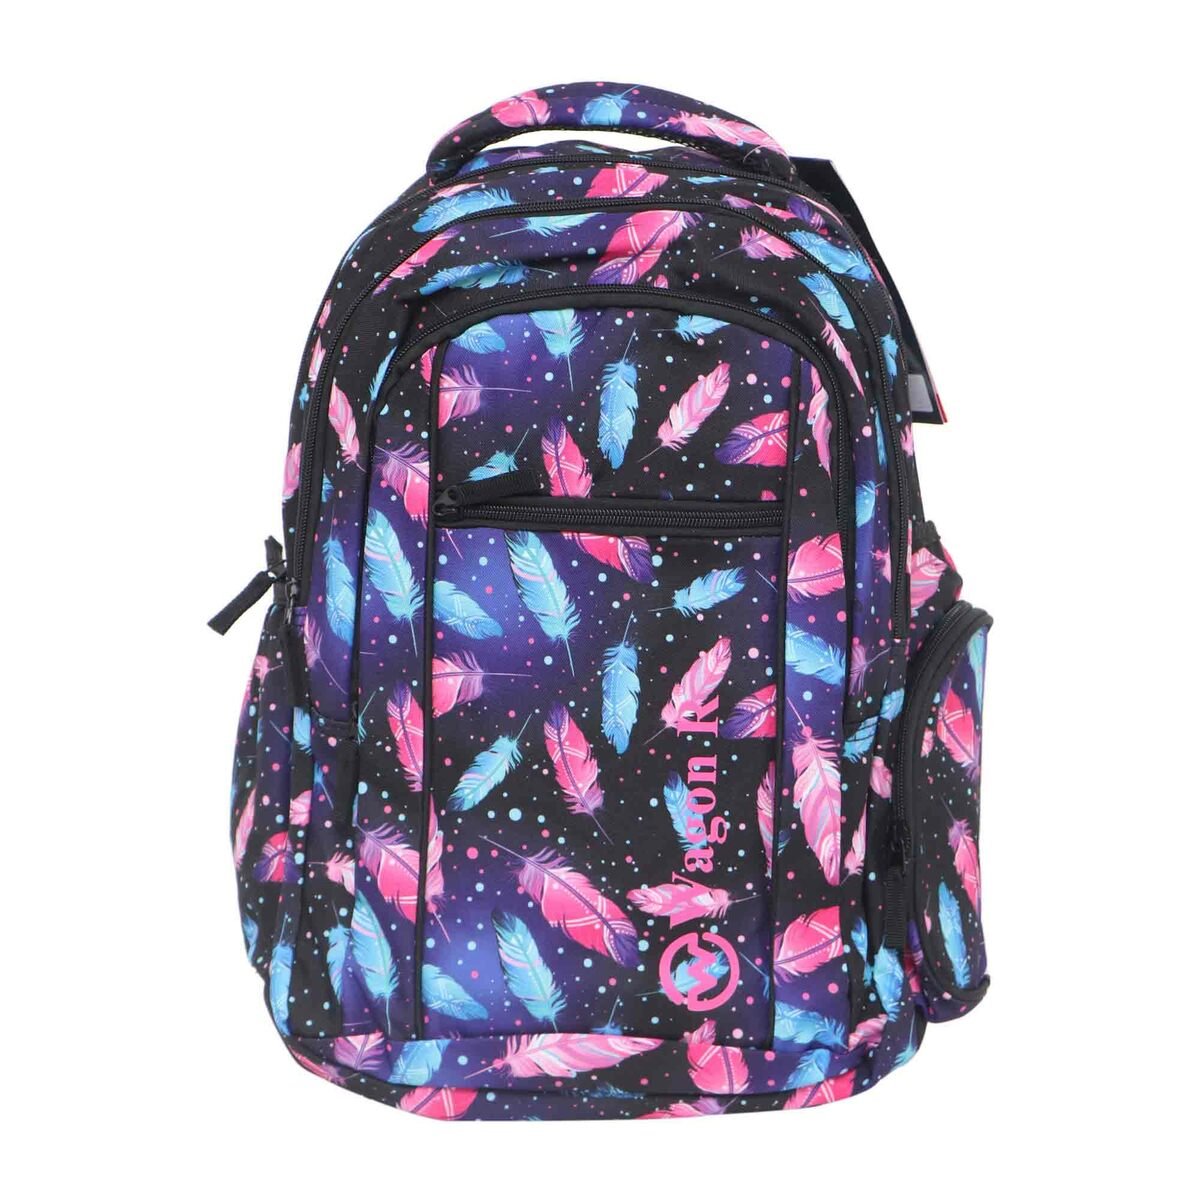 Wagon R Vivid Backpack PL191034 18in, Pink